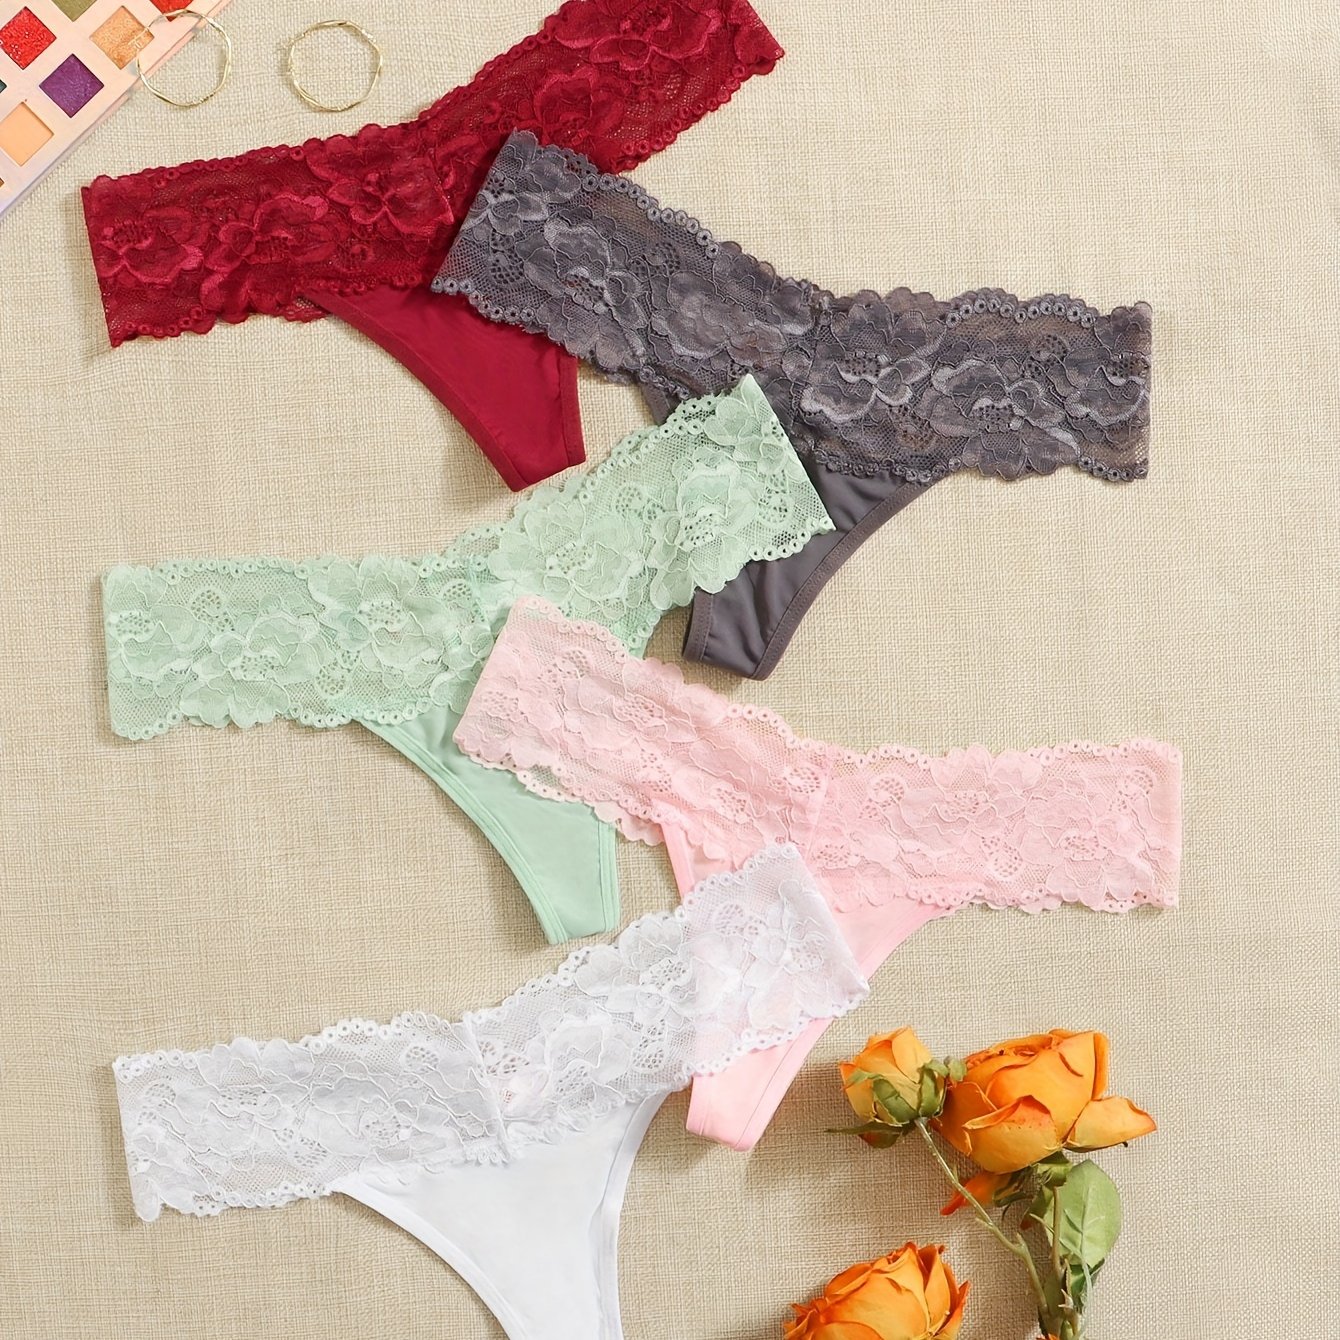 Contrast Lace Thongs Soft Comfy Stretchy Intimates Panties - Temu Canada